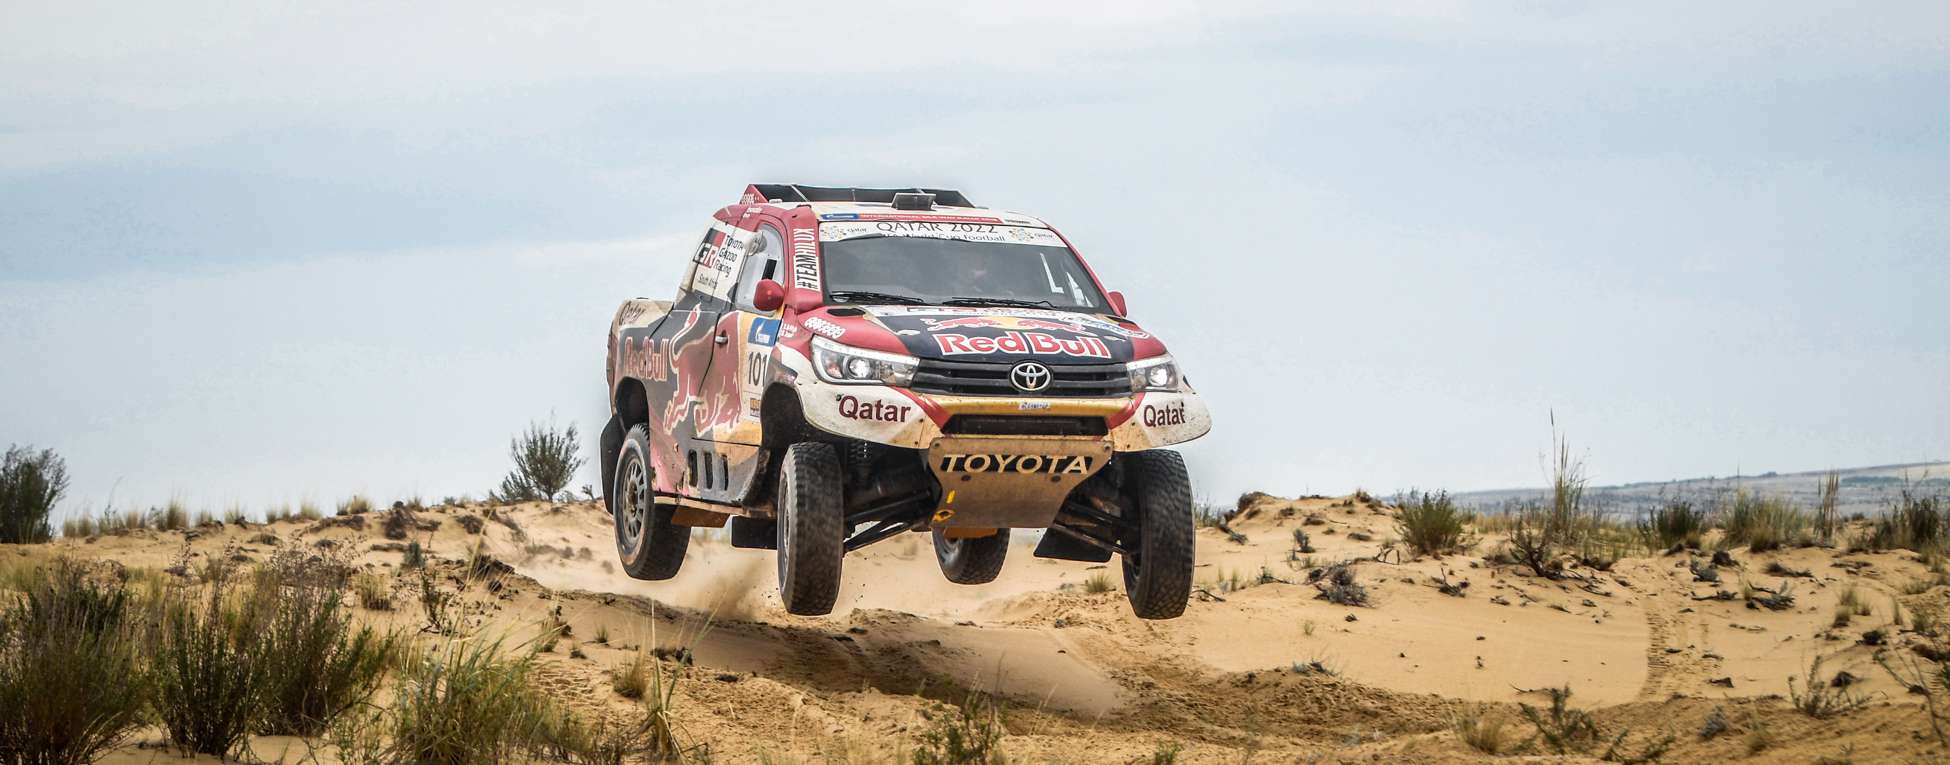 Silk Way Rally 2019: The best offroad racers get in gear for the 2019 Silk Way Rally